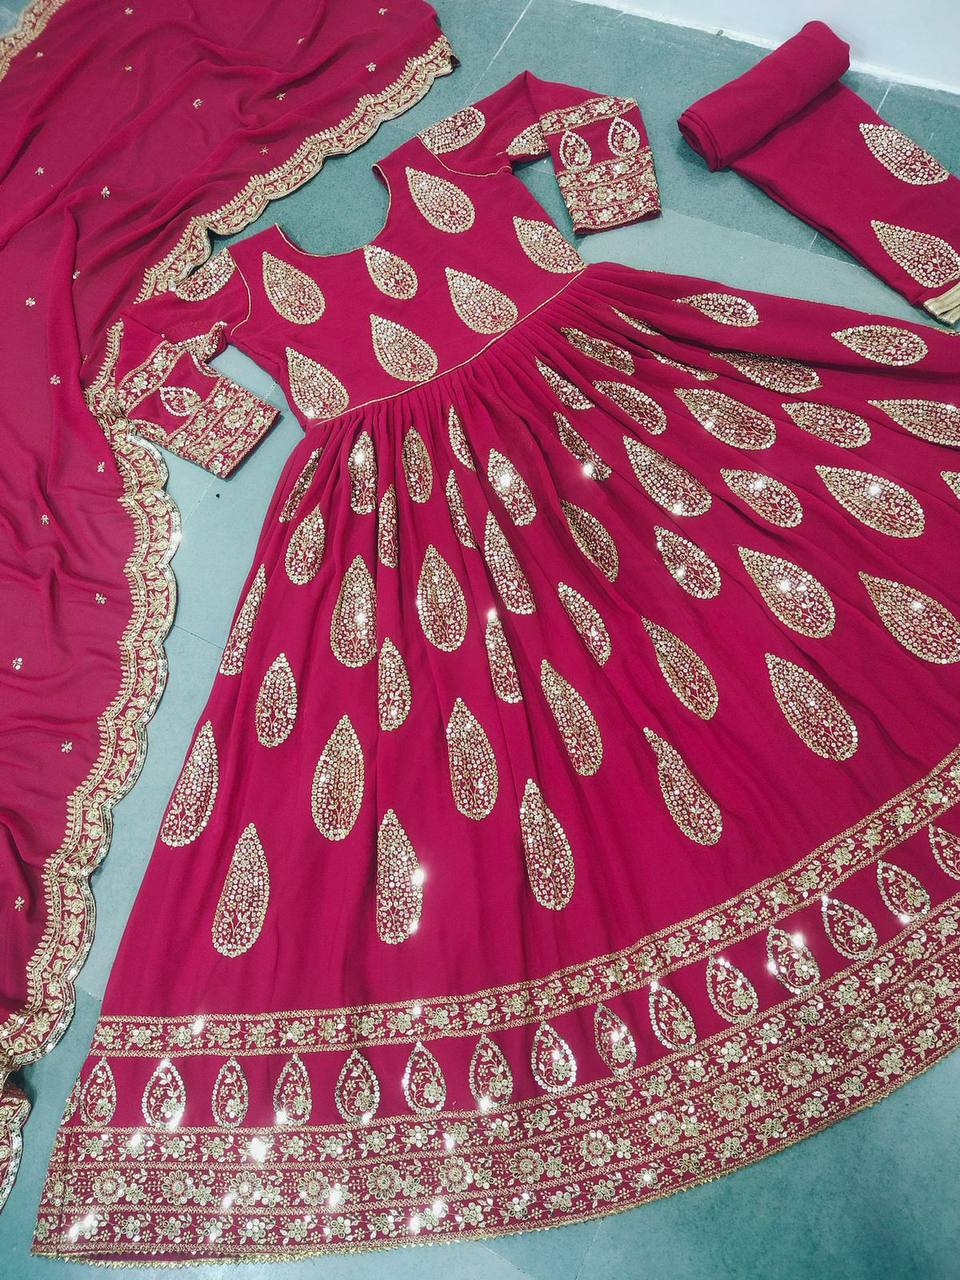 Rani Pink Salwar Suit In Faux Georgette With 5 MM Sequence Work